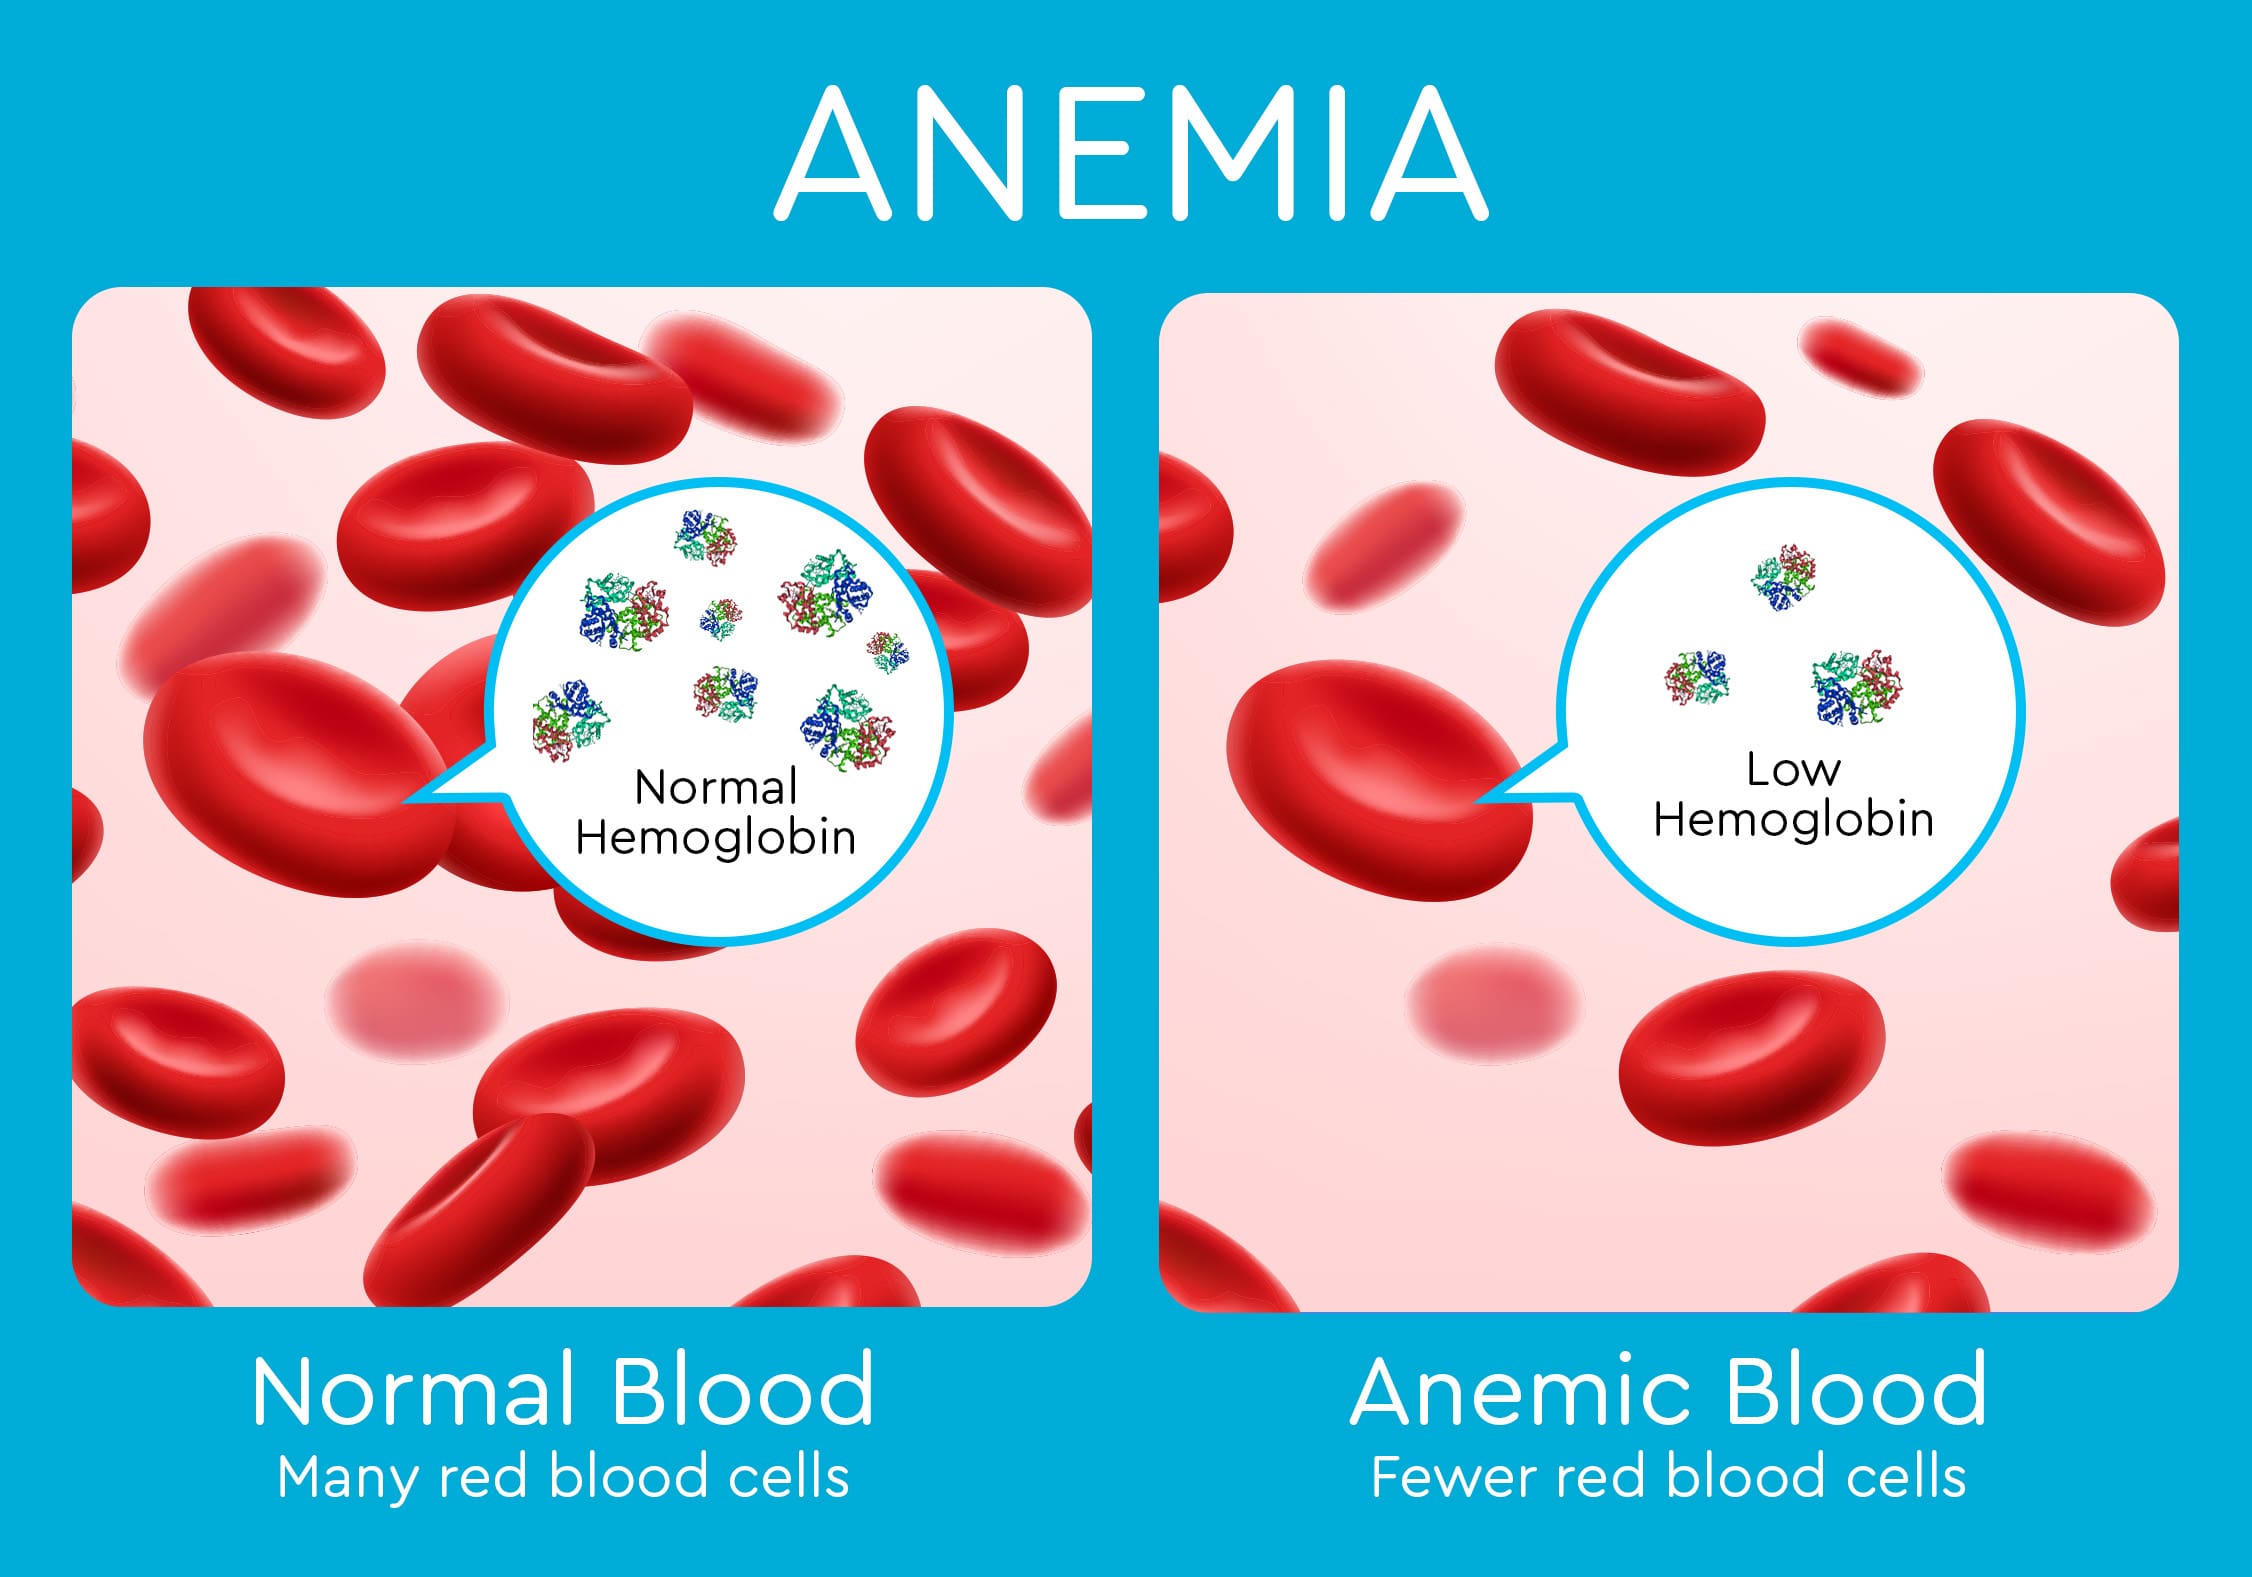 normal blood graphic showing many red blood cells, next to anemic blood graphic showing fewer red blood cells